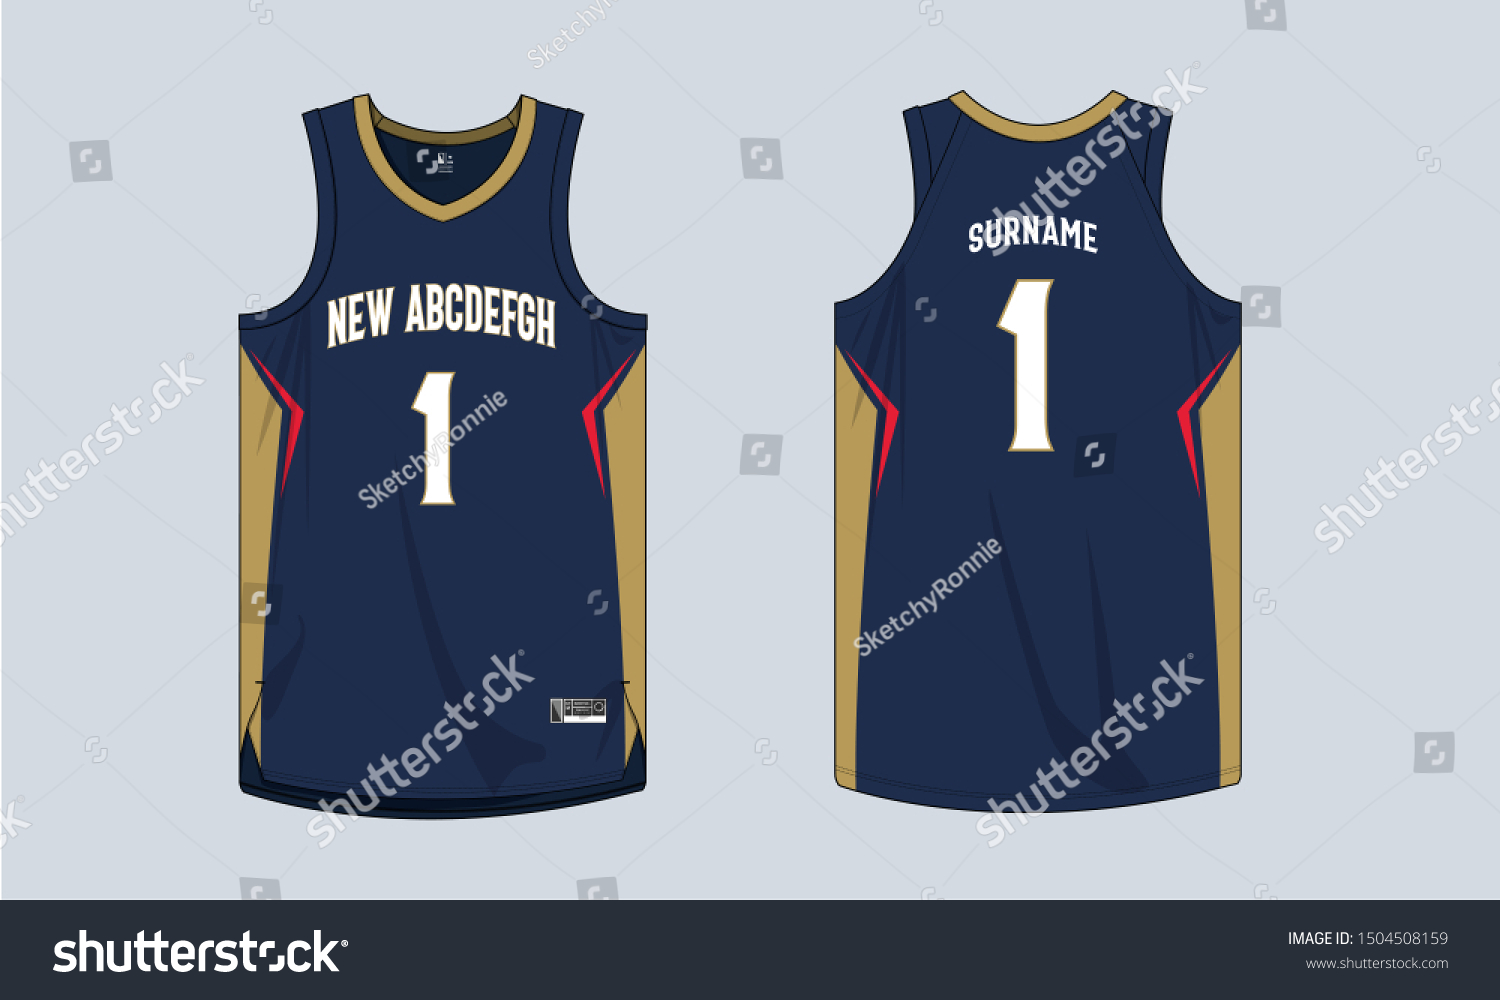 Download Basketball Jersey Mockup Template Vector Design Stock Vector Royalty Free 1504508159